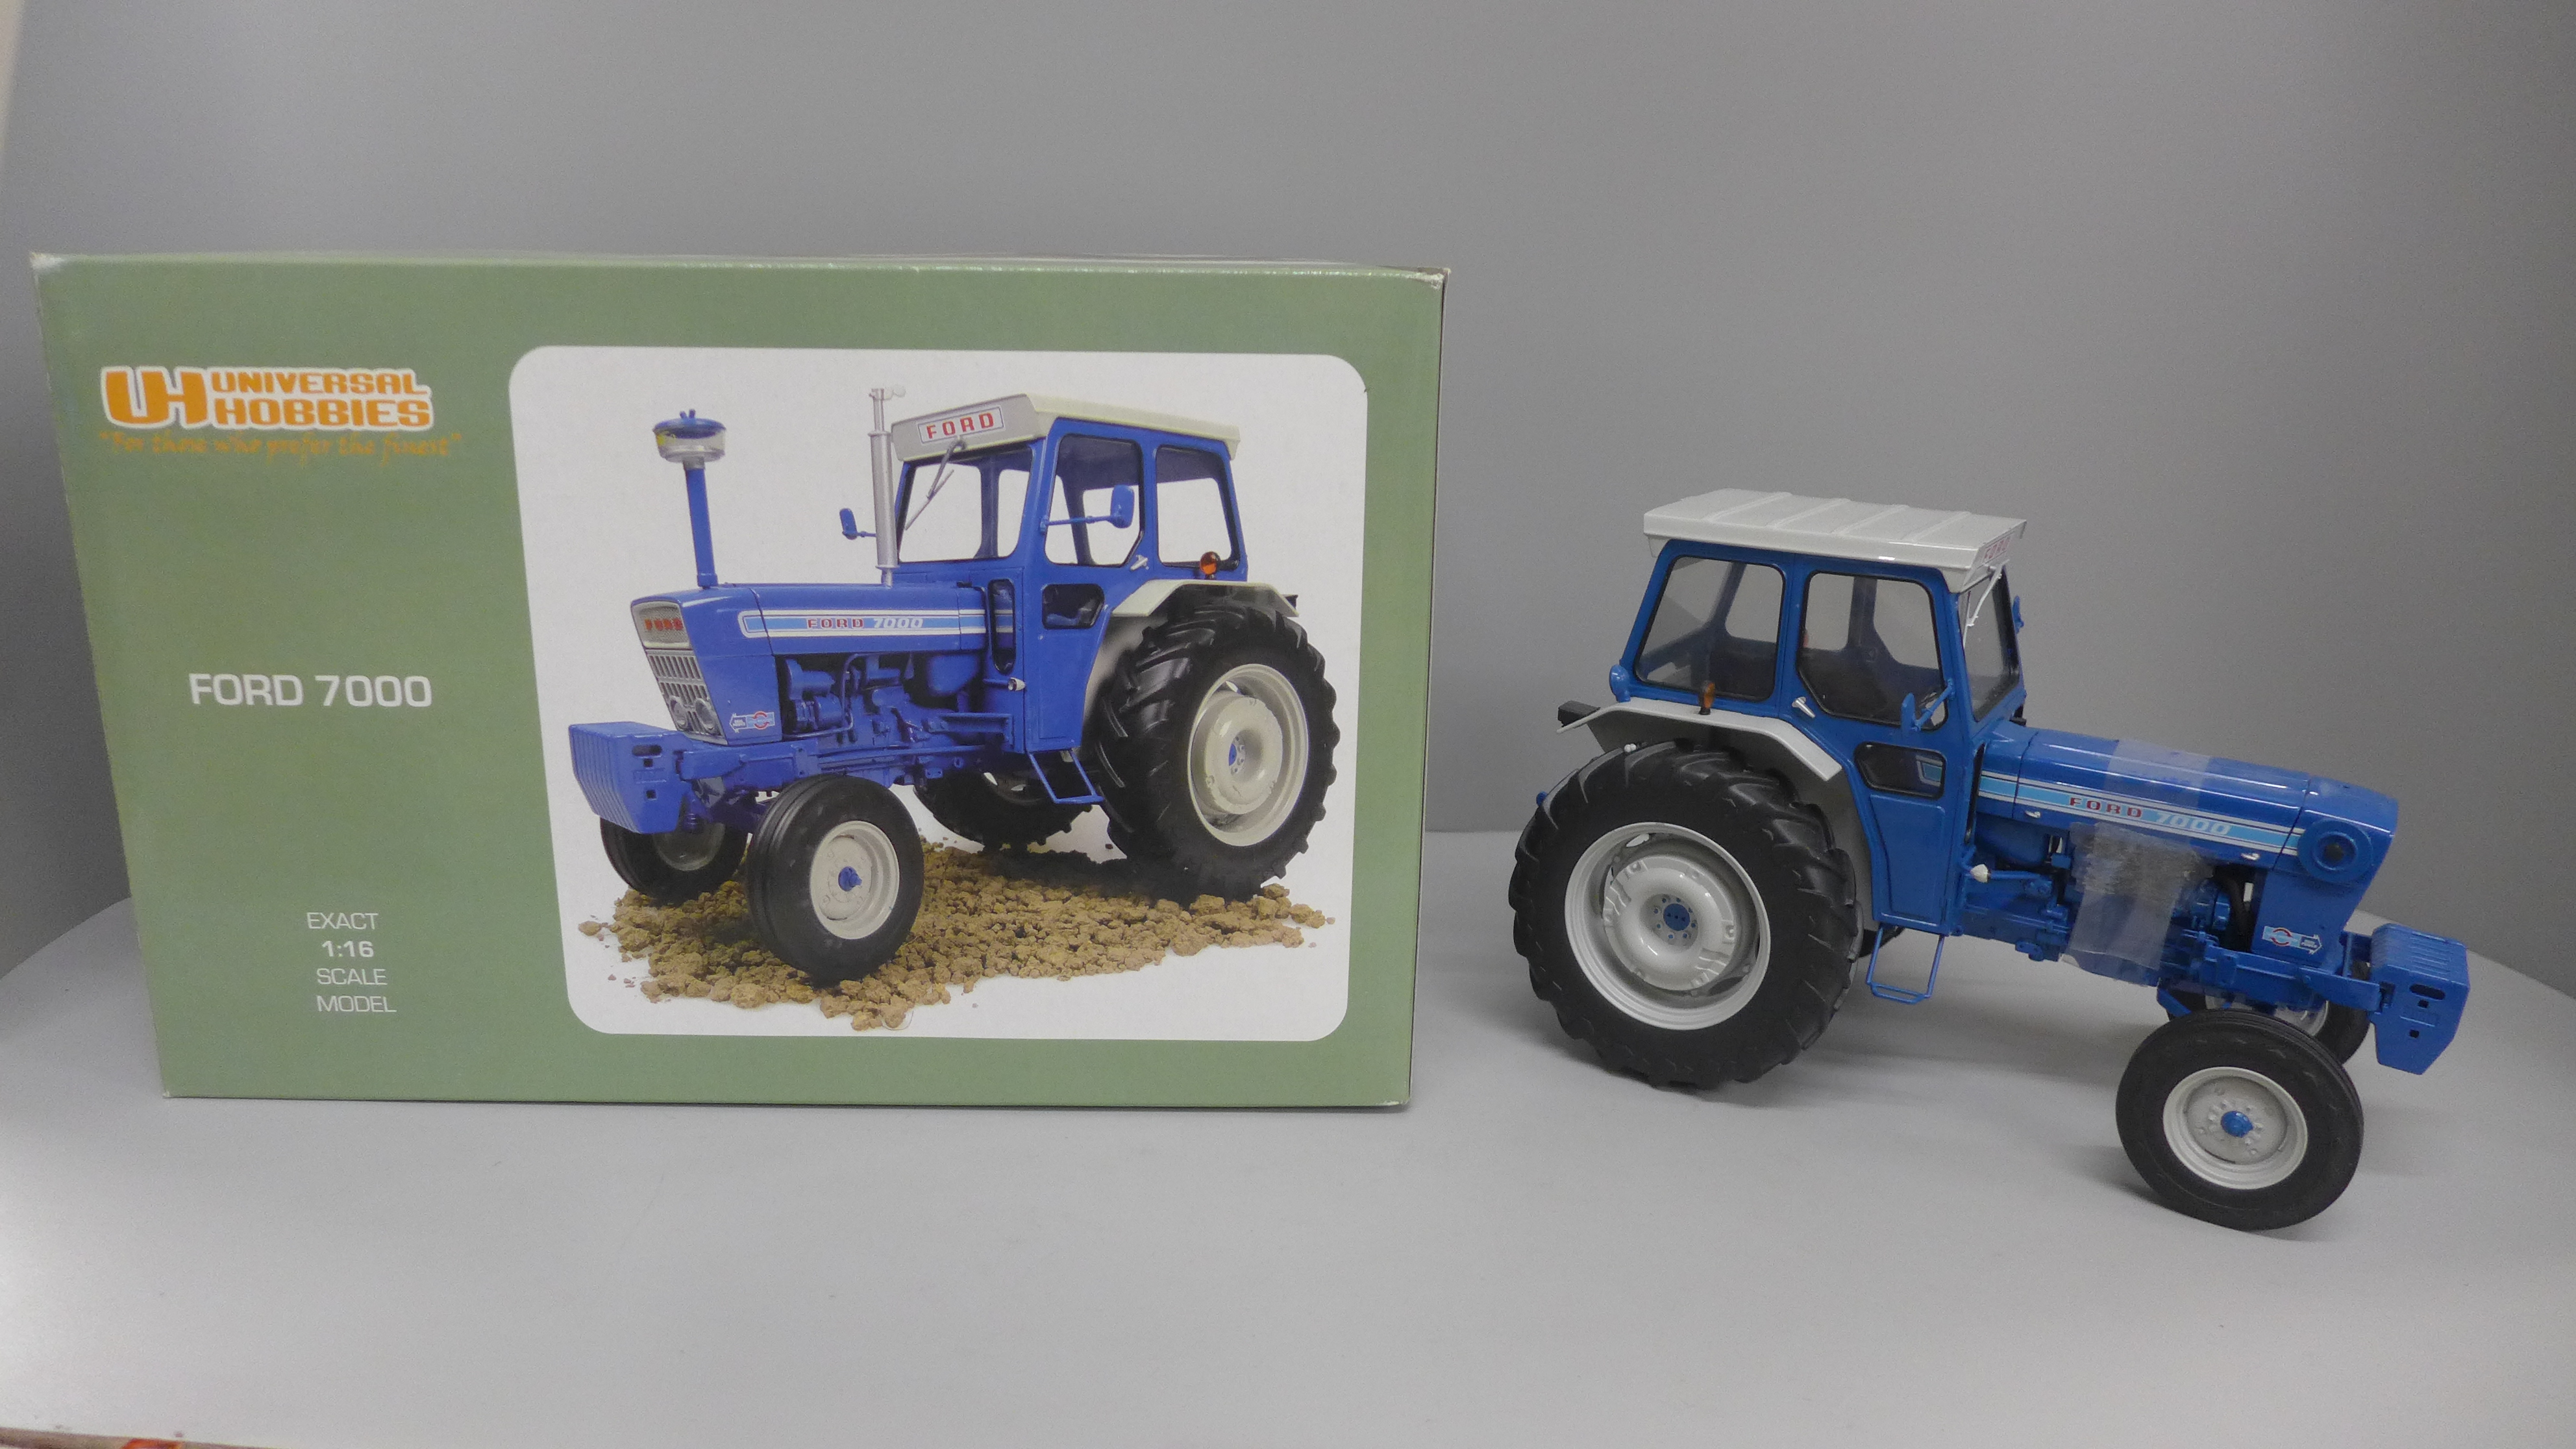 A Universal Hobbies 1:16 scale Ford 7000